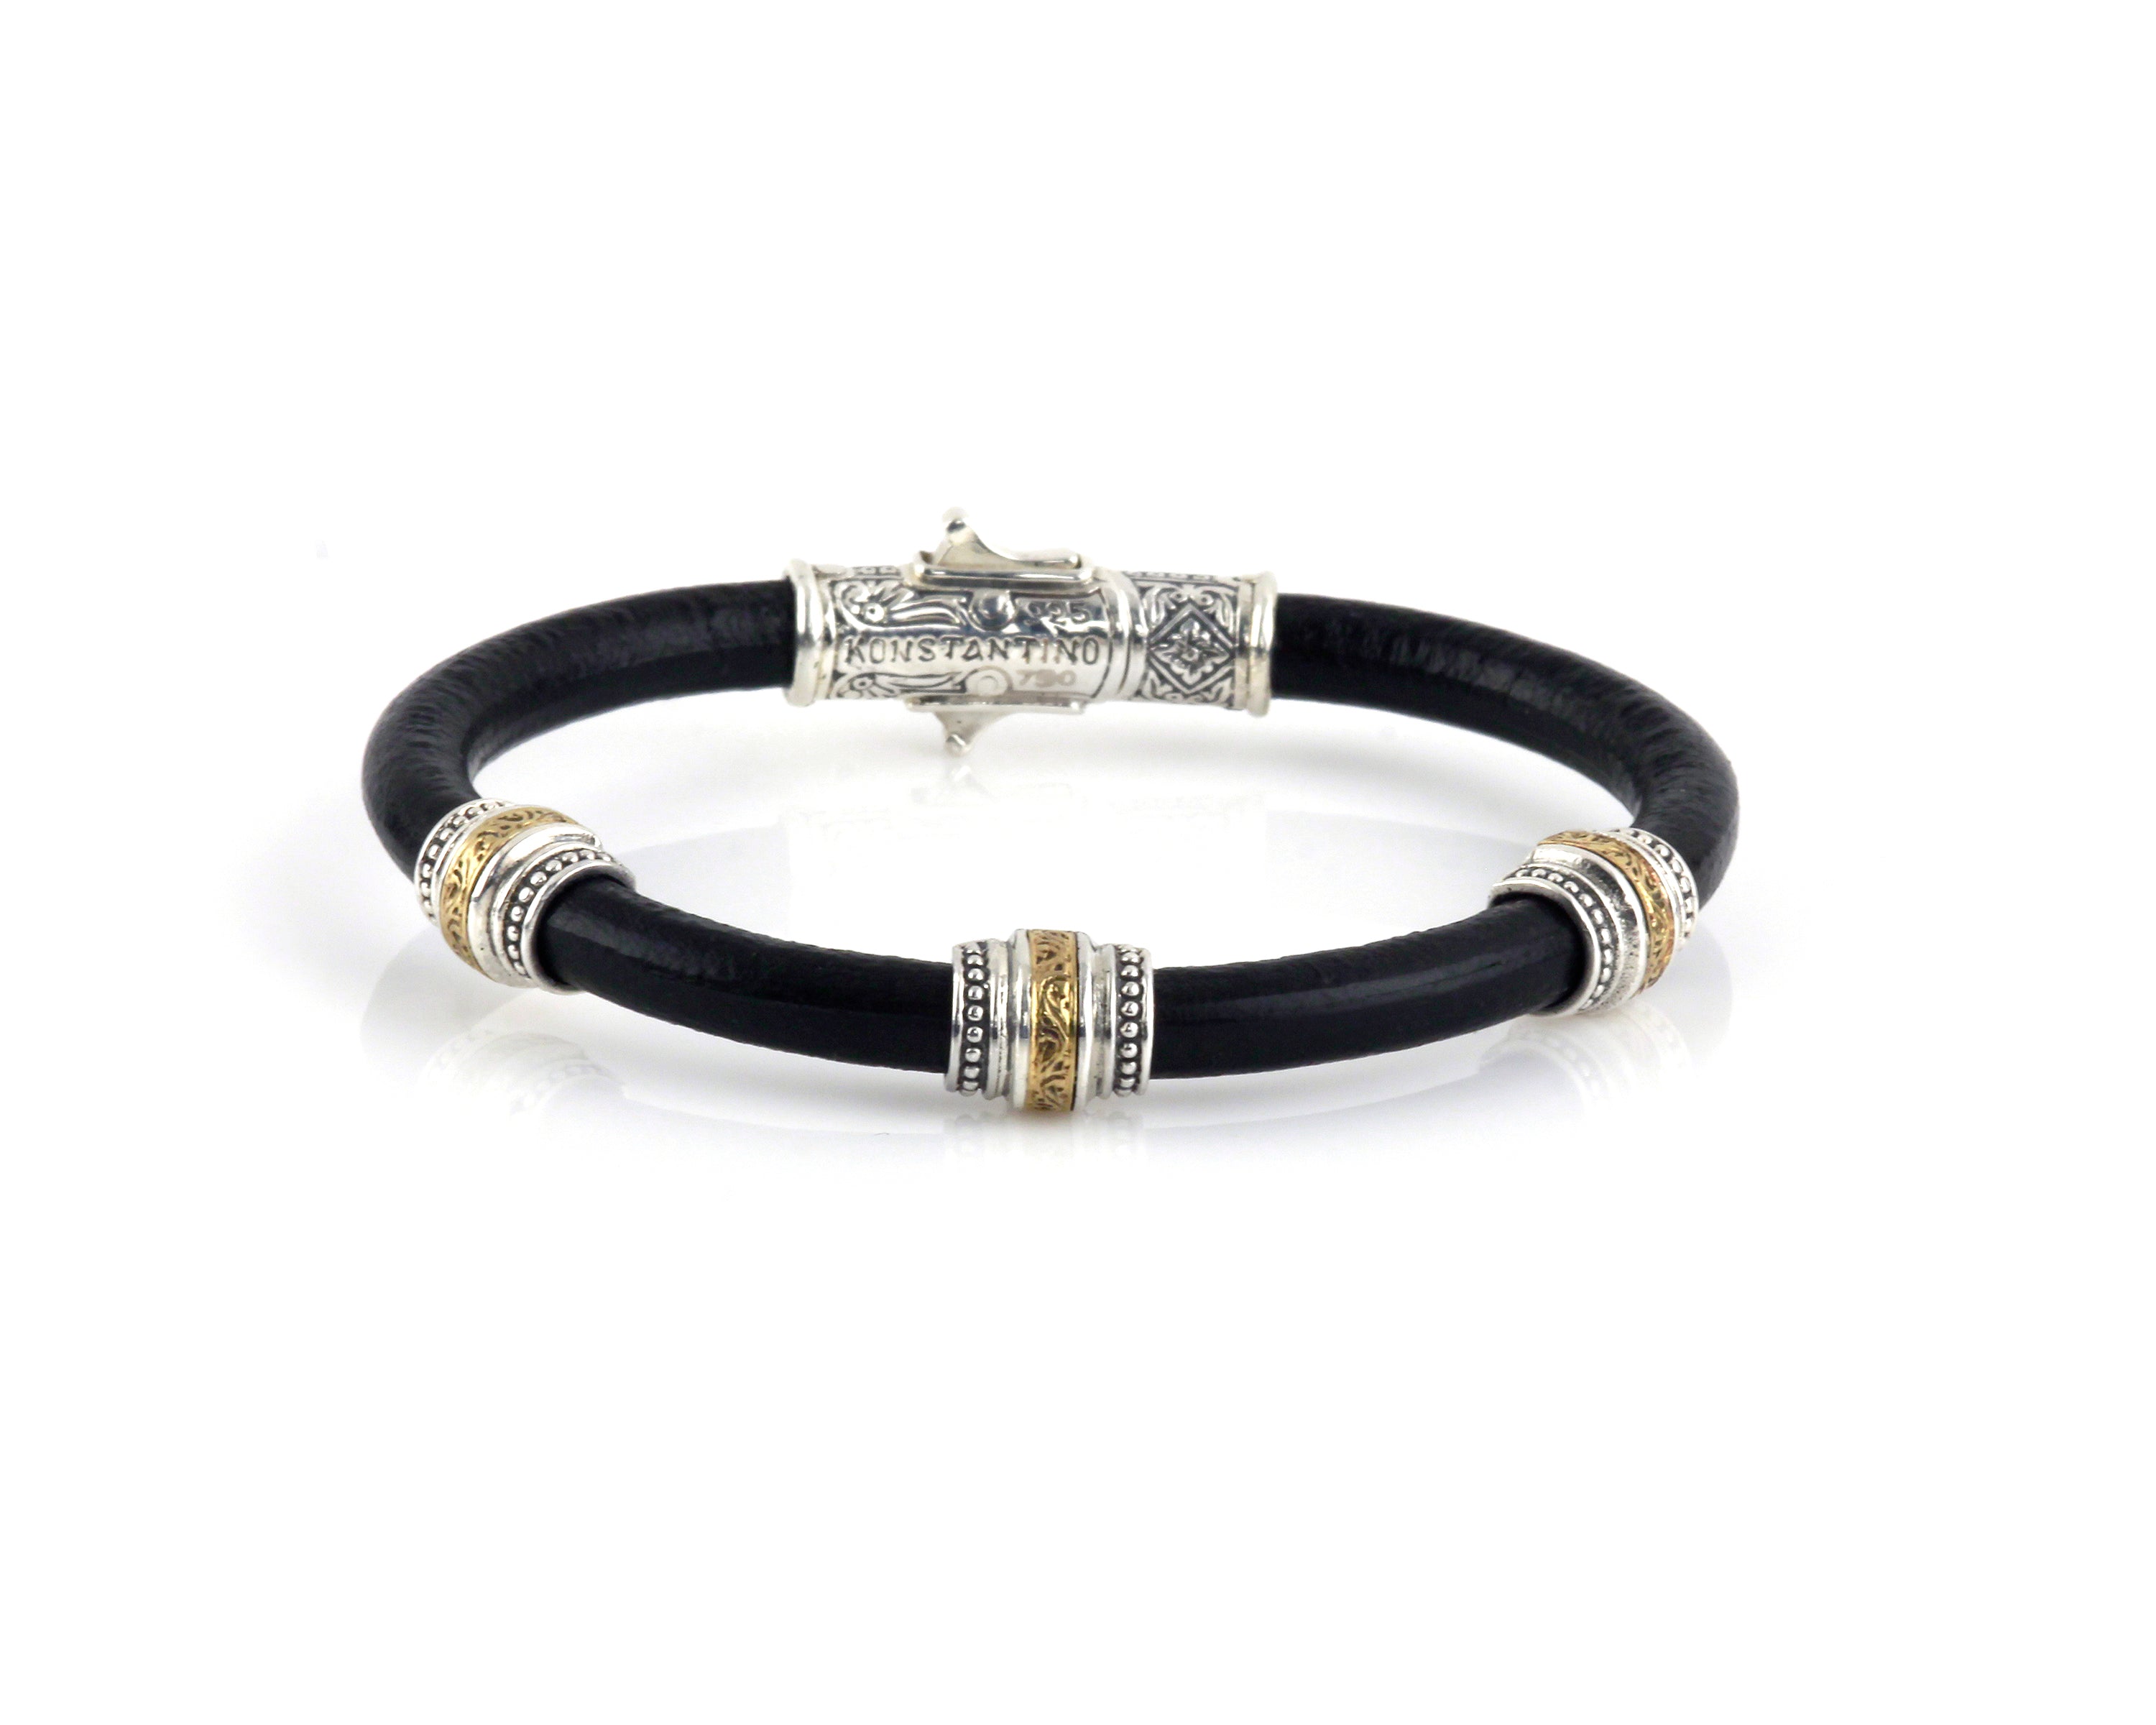 PHIDIAS COLLECTIONSTERLING SILVER & BRONZE WITH BLACK LEATHER BRACELET